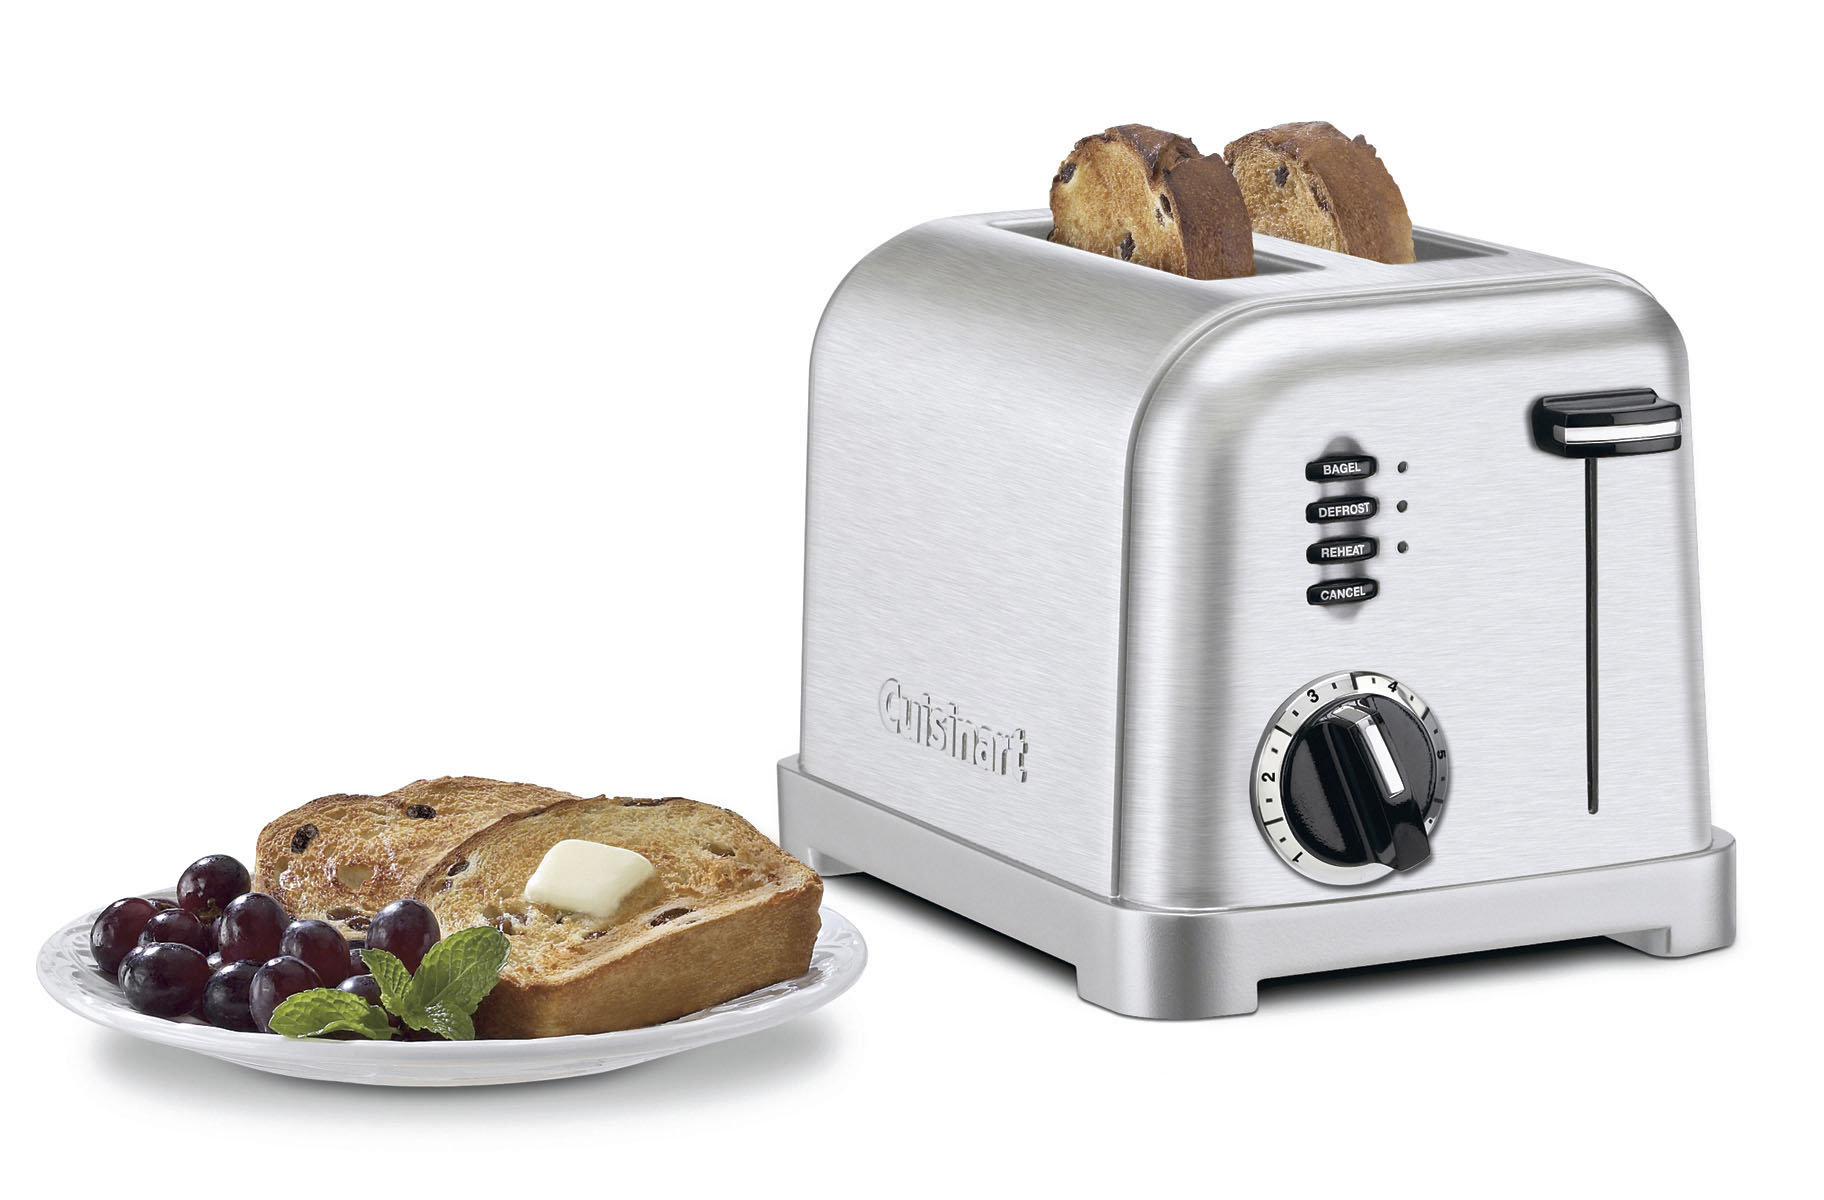 Krups Toaster Review & Demo